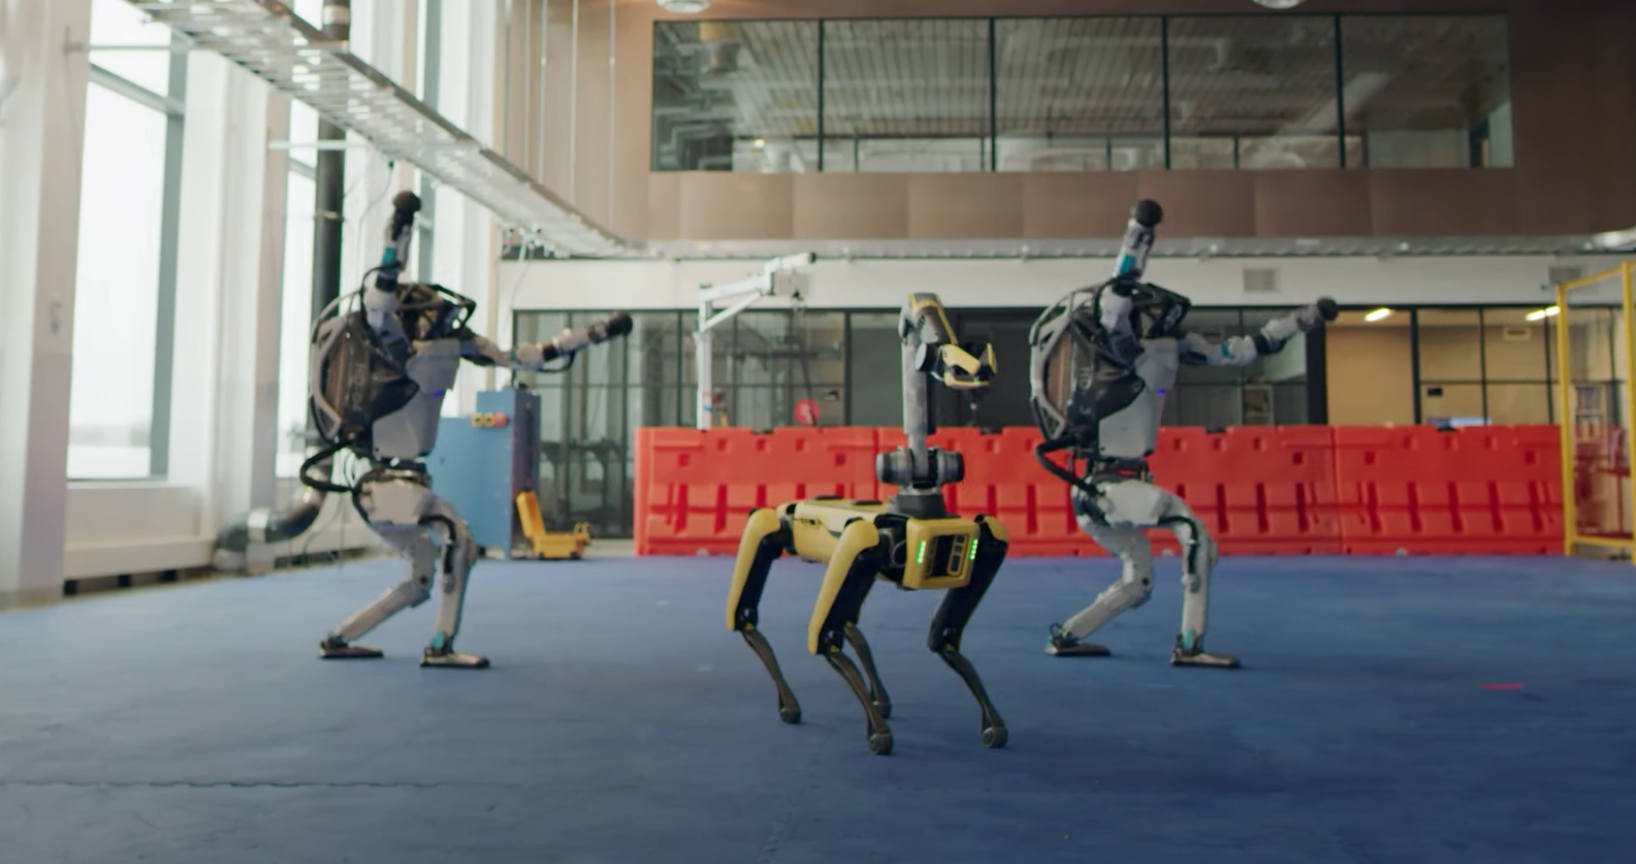 Is Boston Dynamics Real? The New Robot Video Looks Like It Could Be CGI